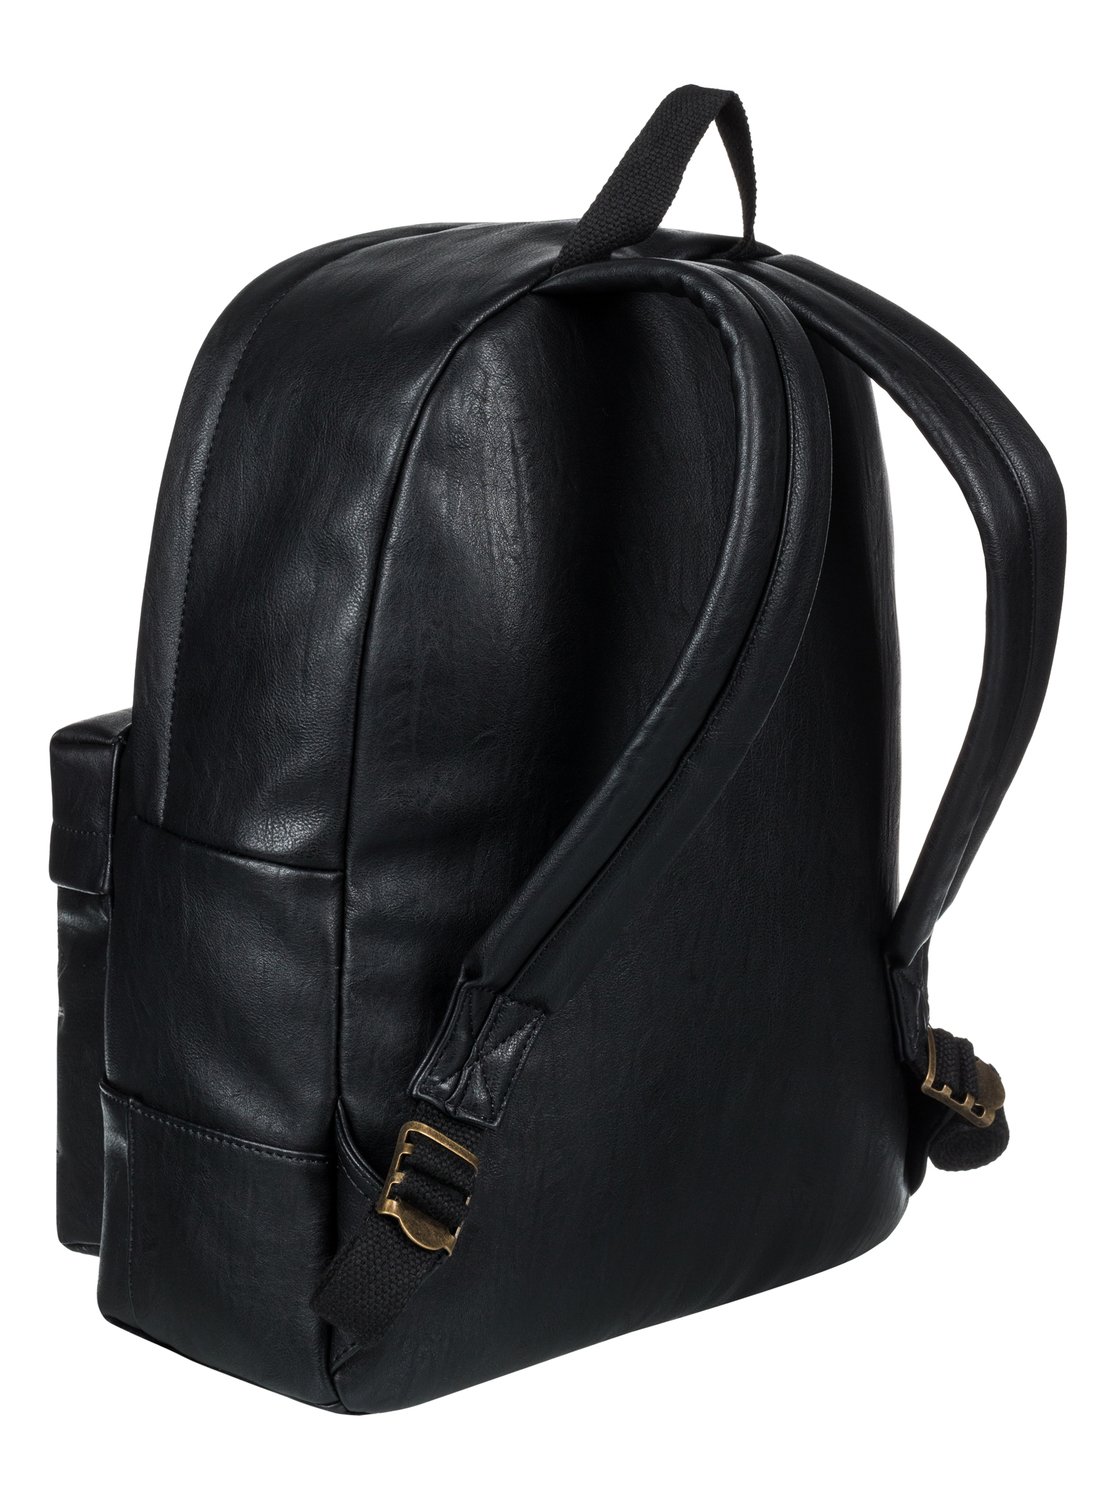 Nothing Like 2 - Small Fake Leather Backpack 3613373479594 | Roxy